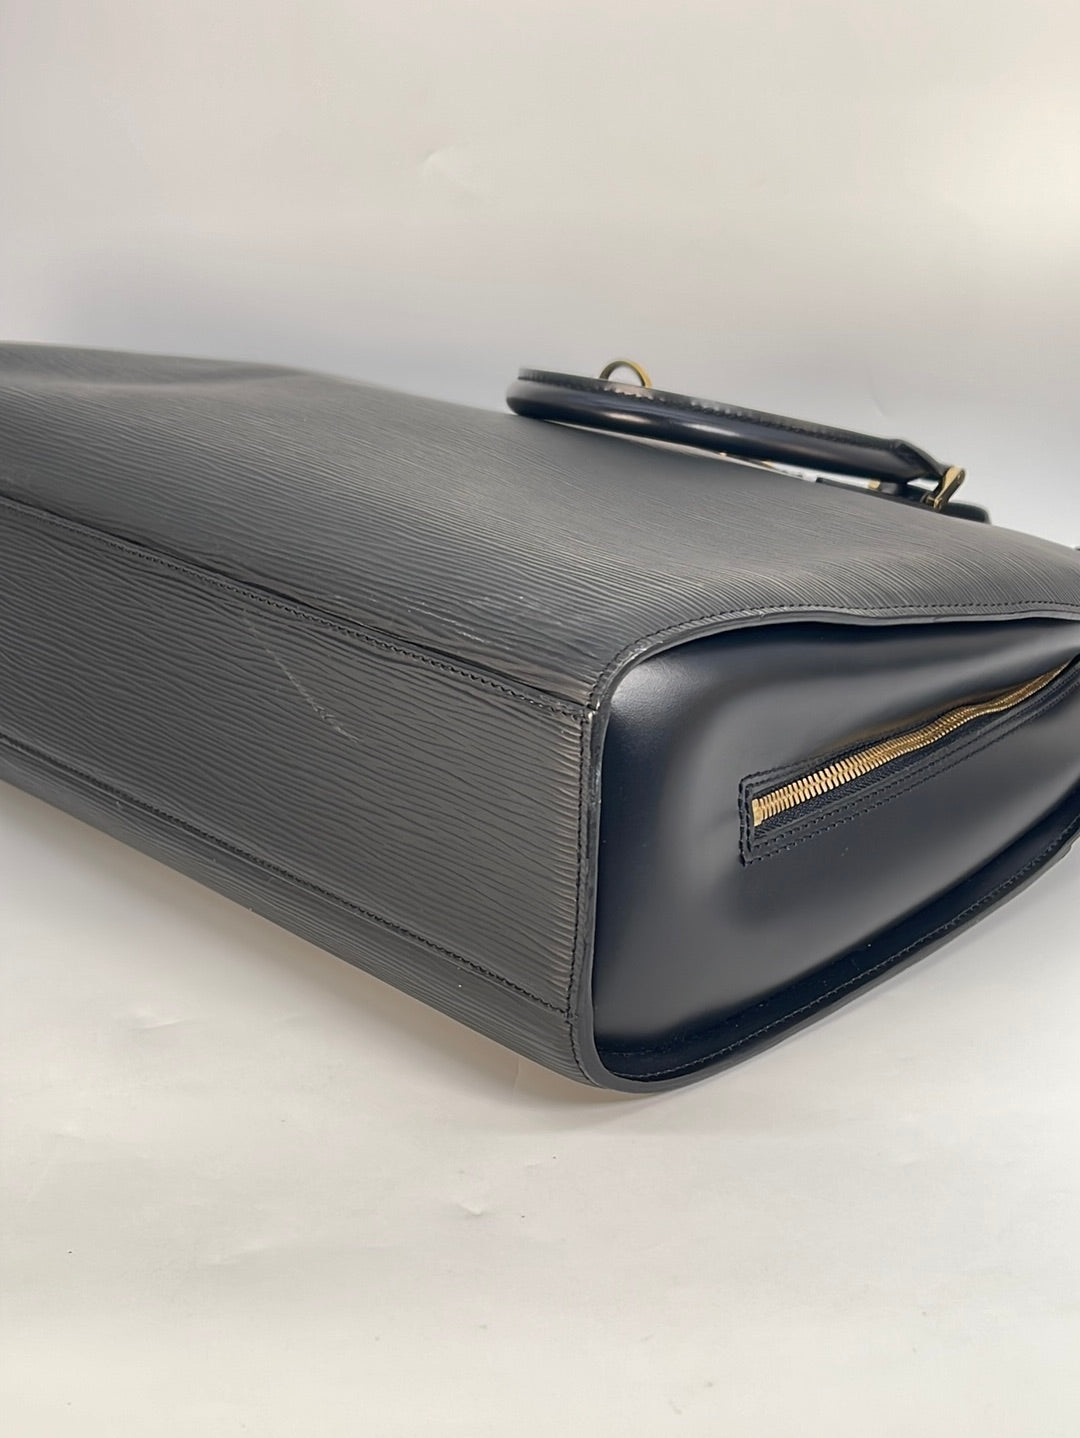 Vintage French Briefcase in Black Epi Leather from Louis Vuitton, 1990